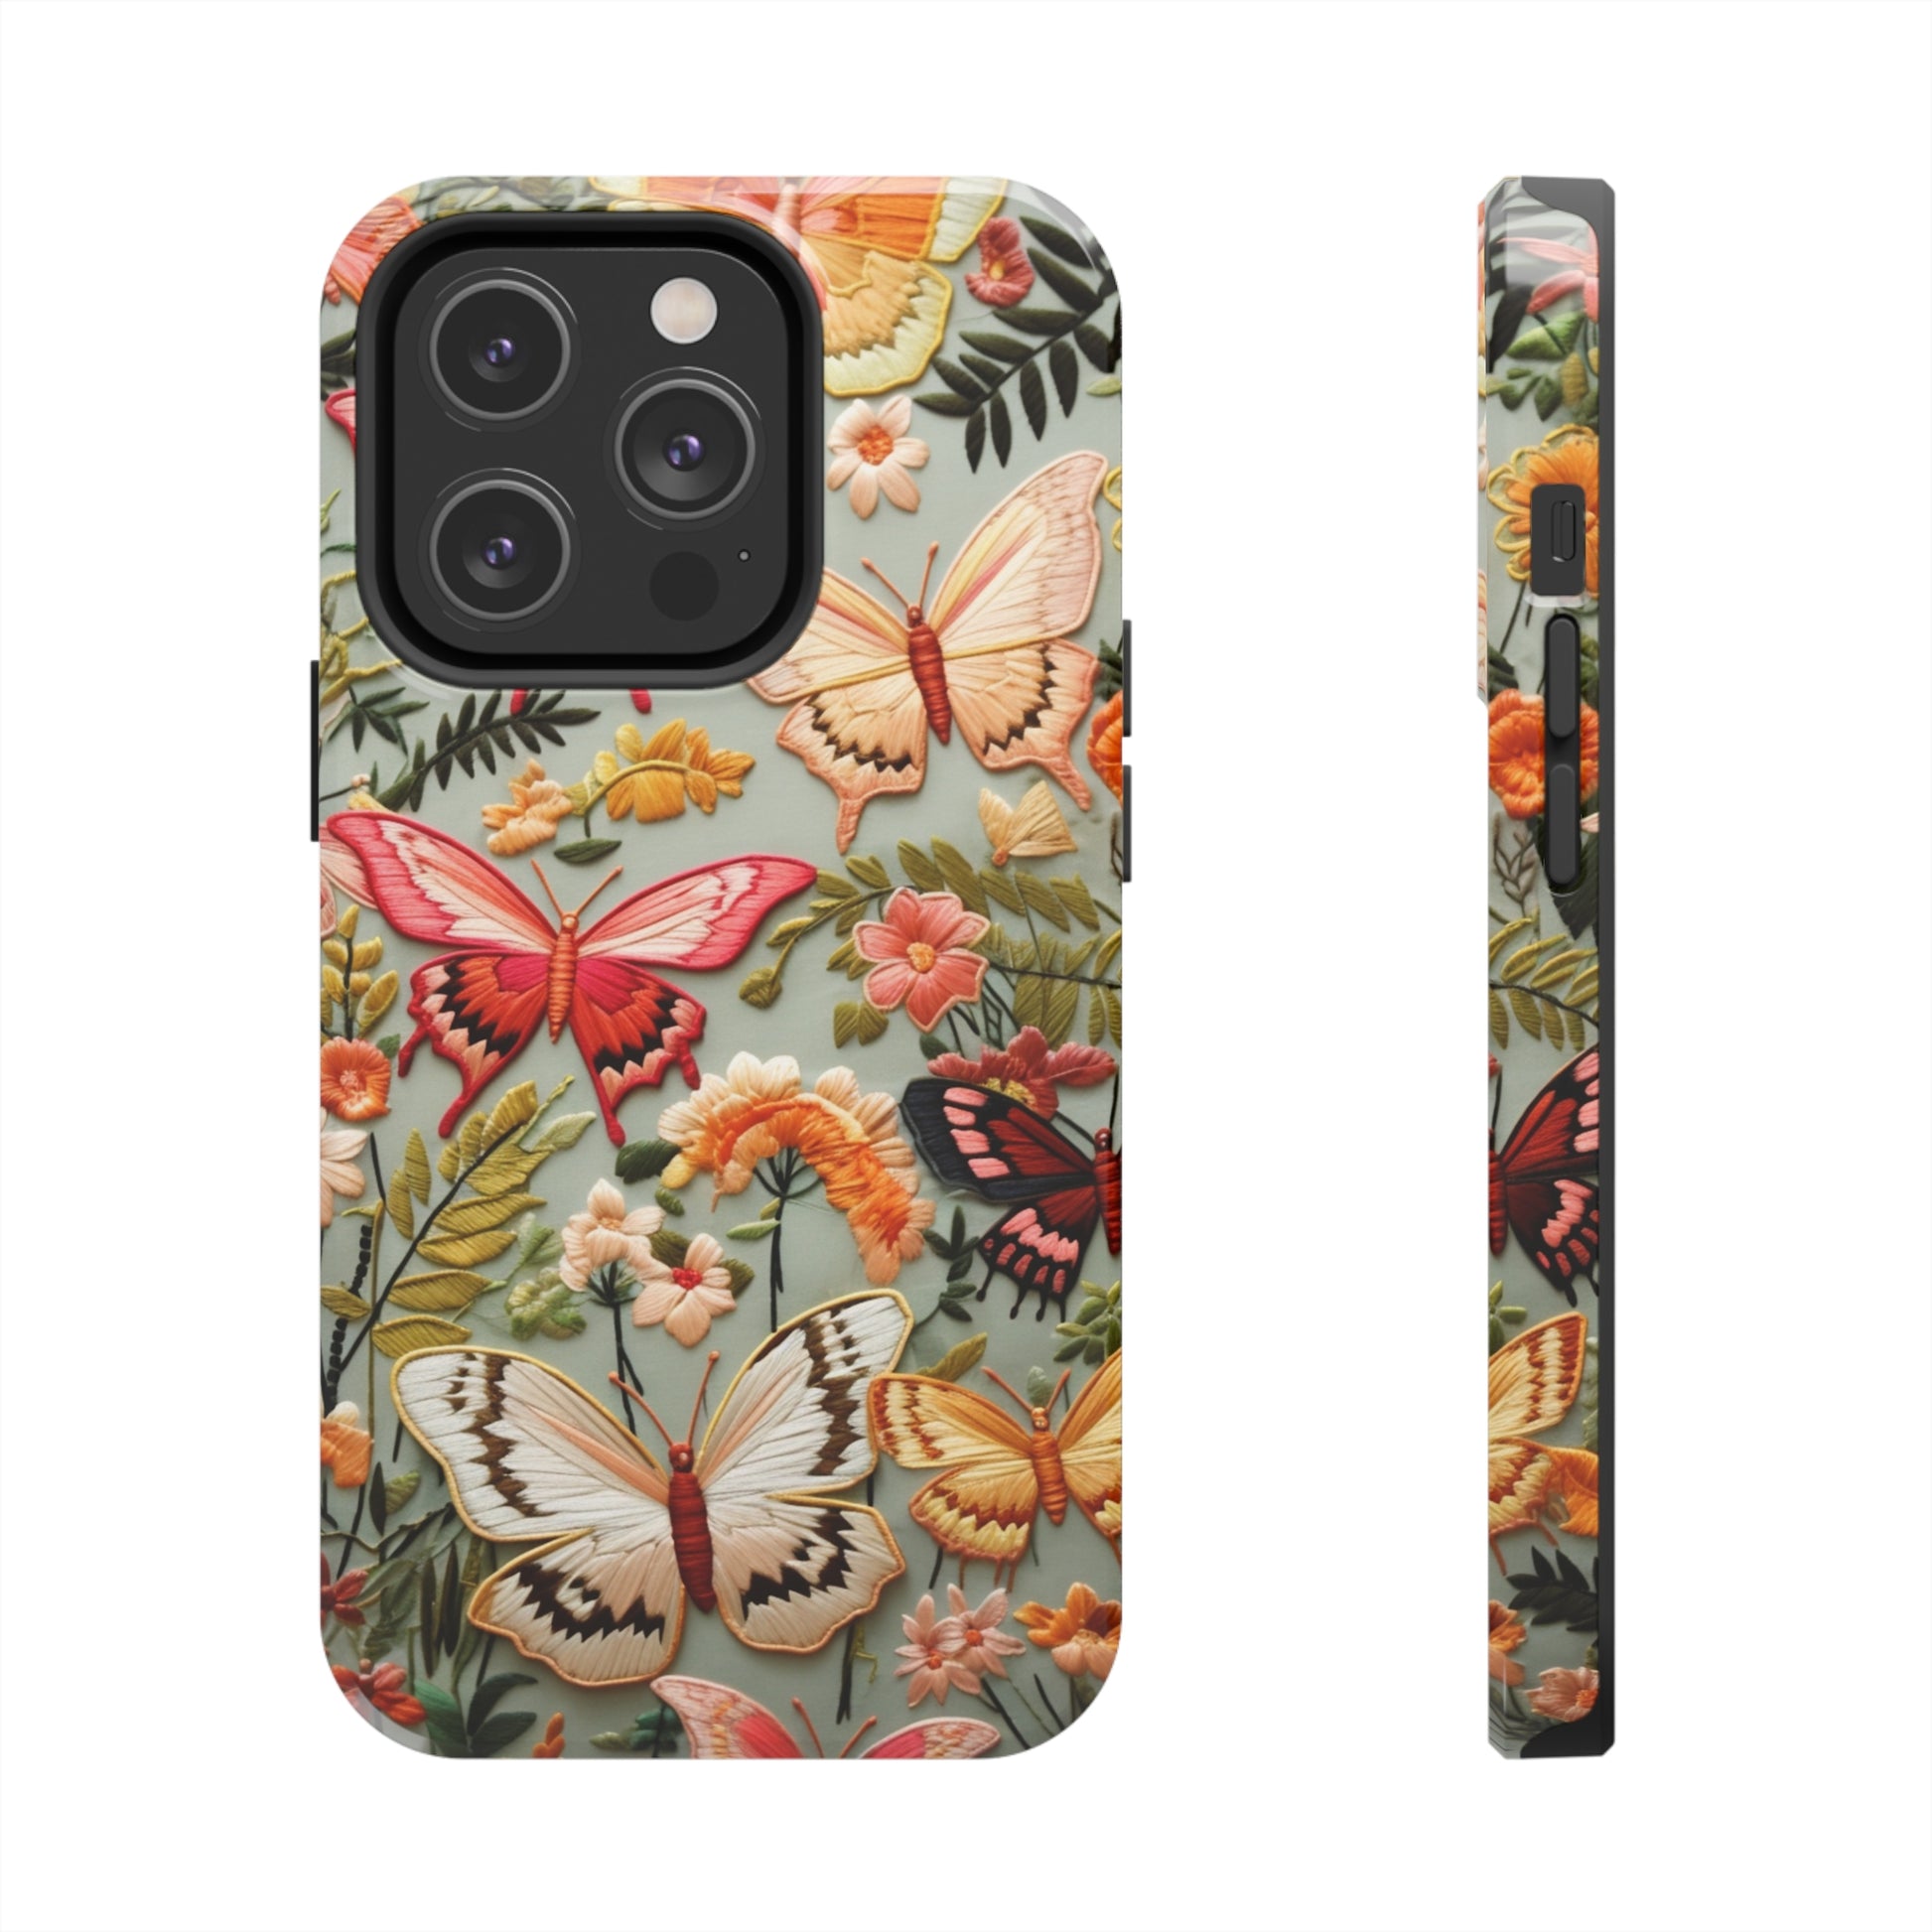 Protective iPhone 11 and 14 case with detailed stitch patterns